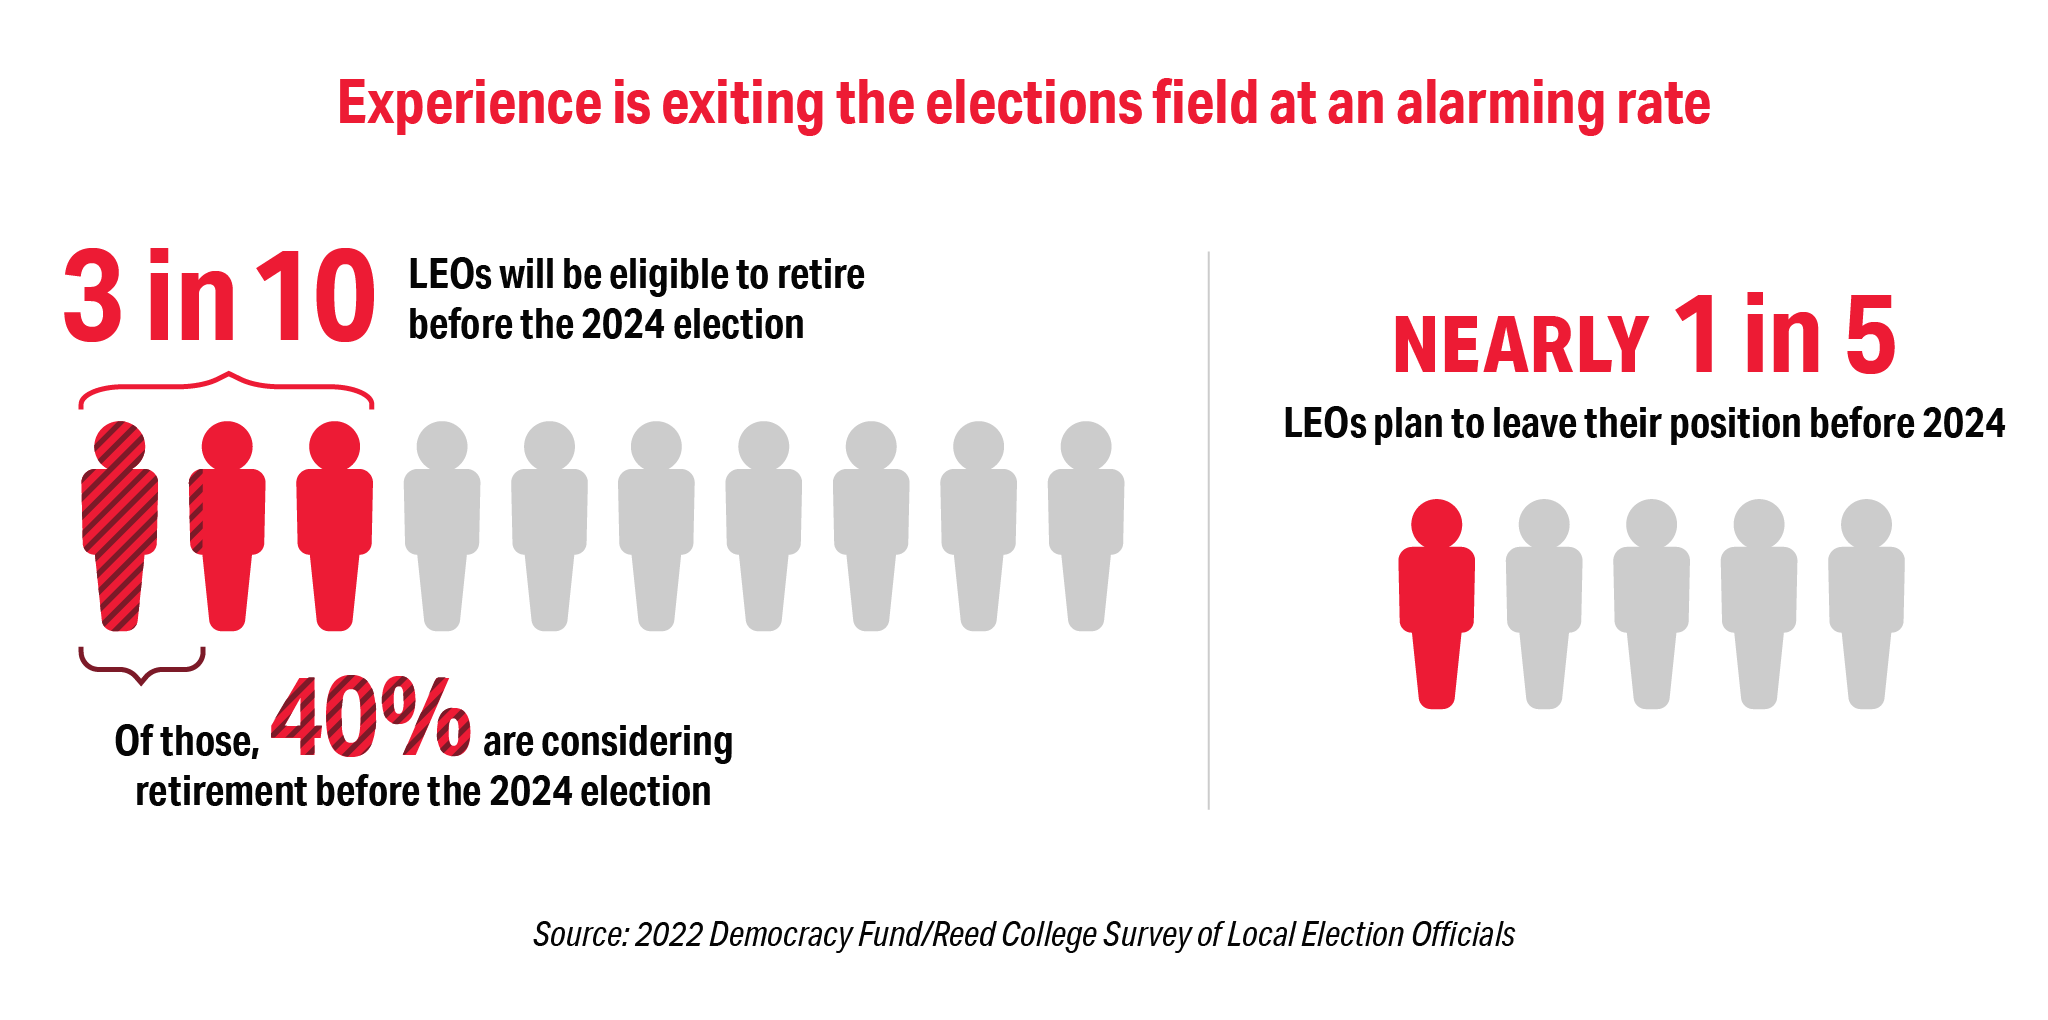 Graphic showing 3 in 10 local election officials will be eligible to retire before the 2024 election and that nearly 1 in 5 plan to leave before 2024. 